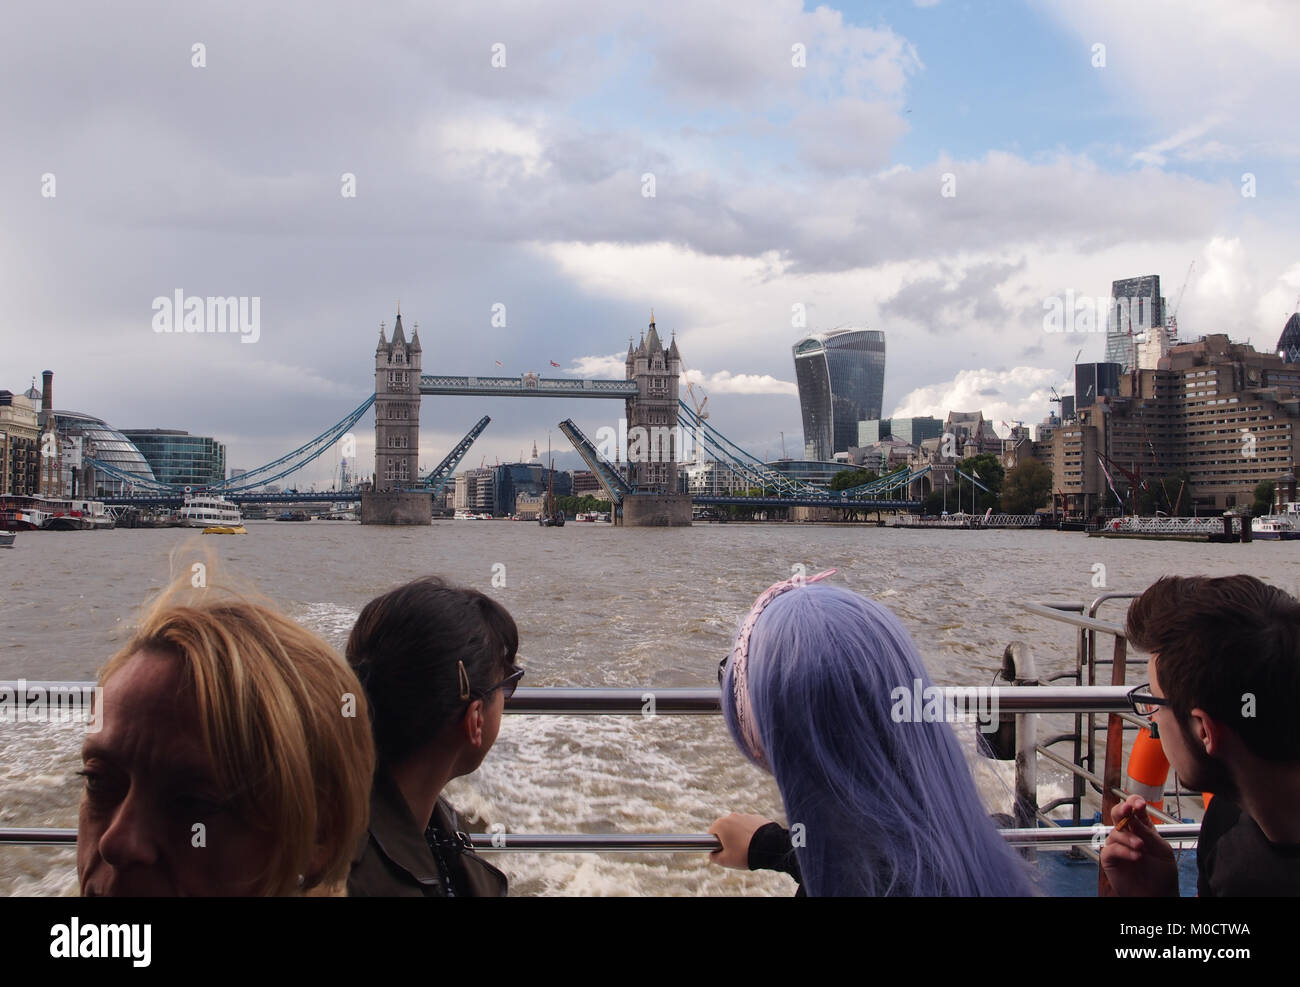 A view from the back of a Thames River passenger cruiser looking back to a raised Tower Bridge with four passengers in the foreground Stock Photo